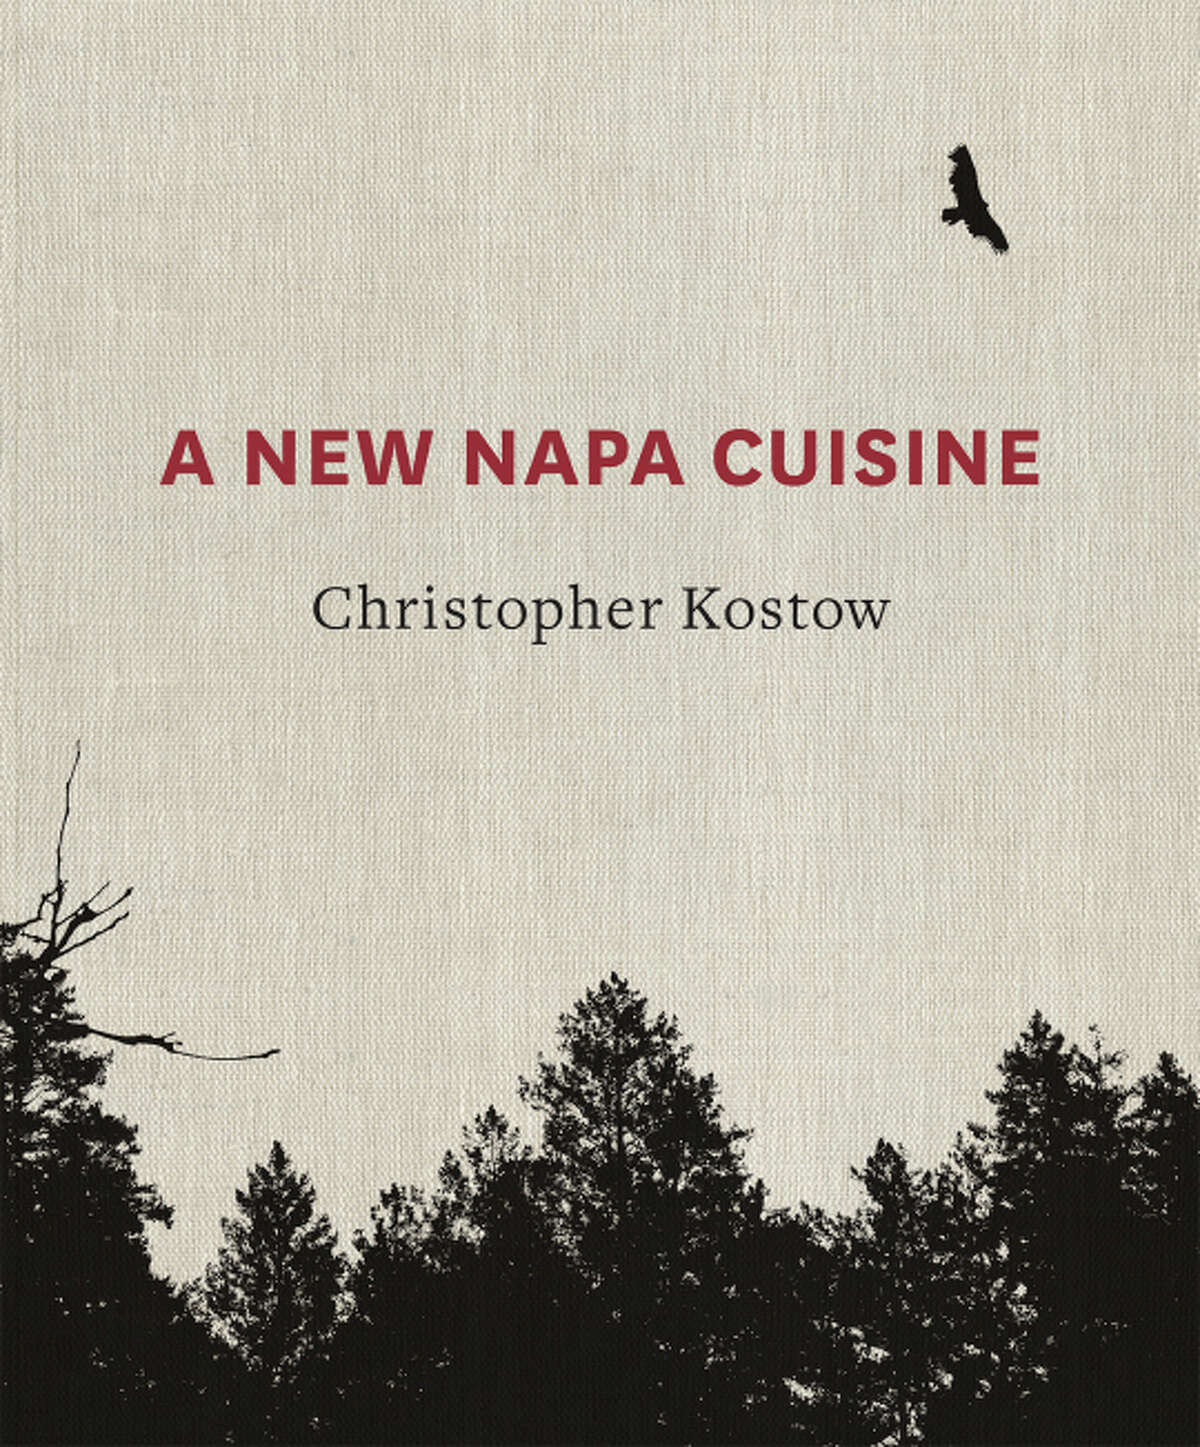 Cover of “A New Napa Cuisine,” by Christopher Kostow.